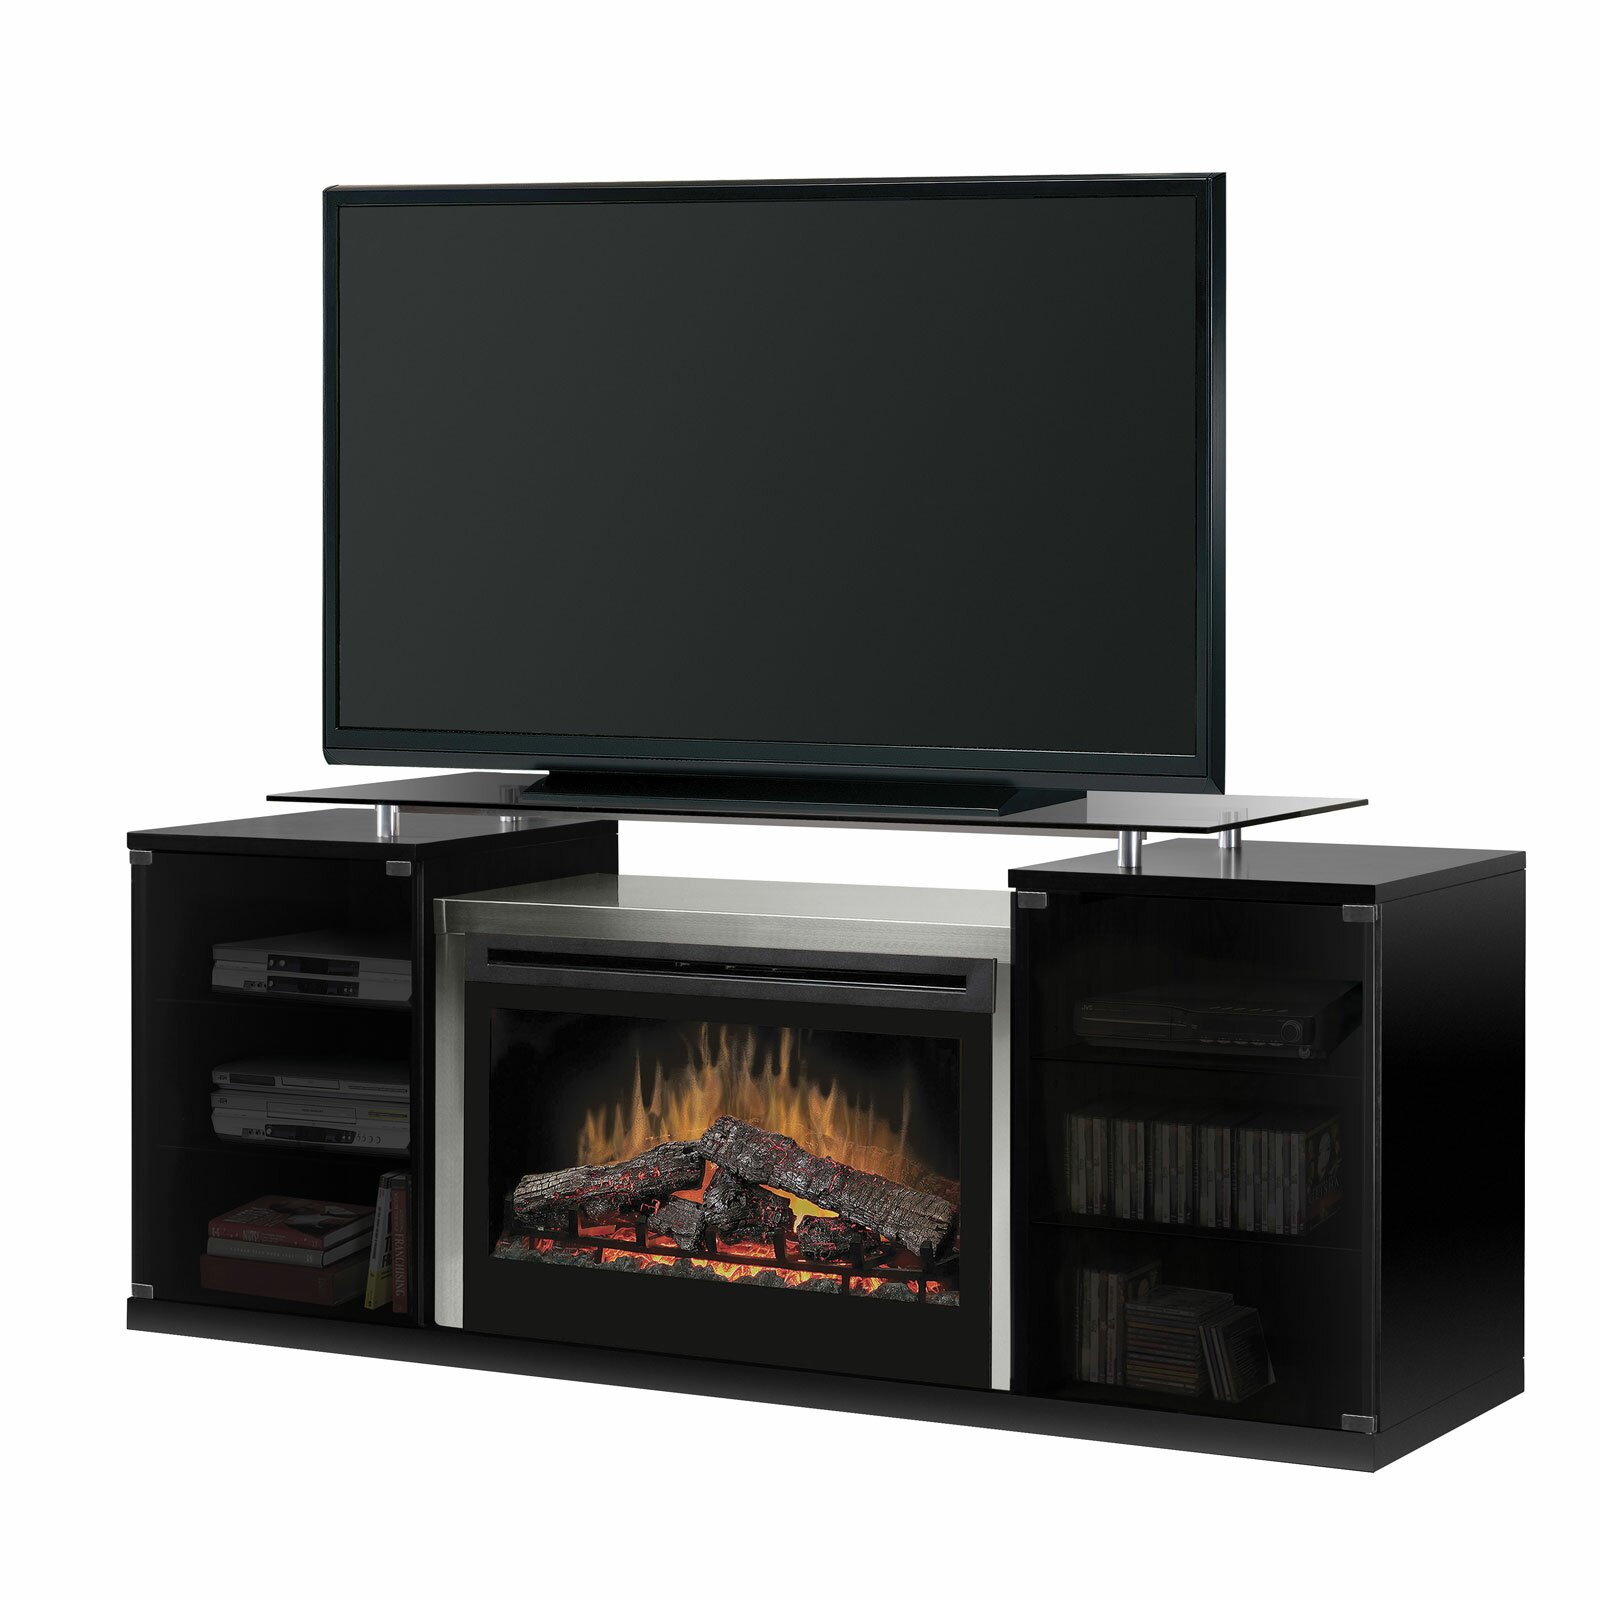 Dimplex Marana TV Stand with Electric Fireplace & Reviews ...